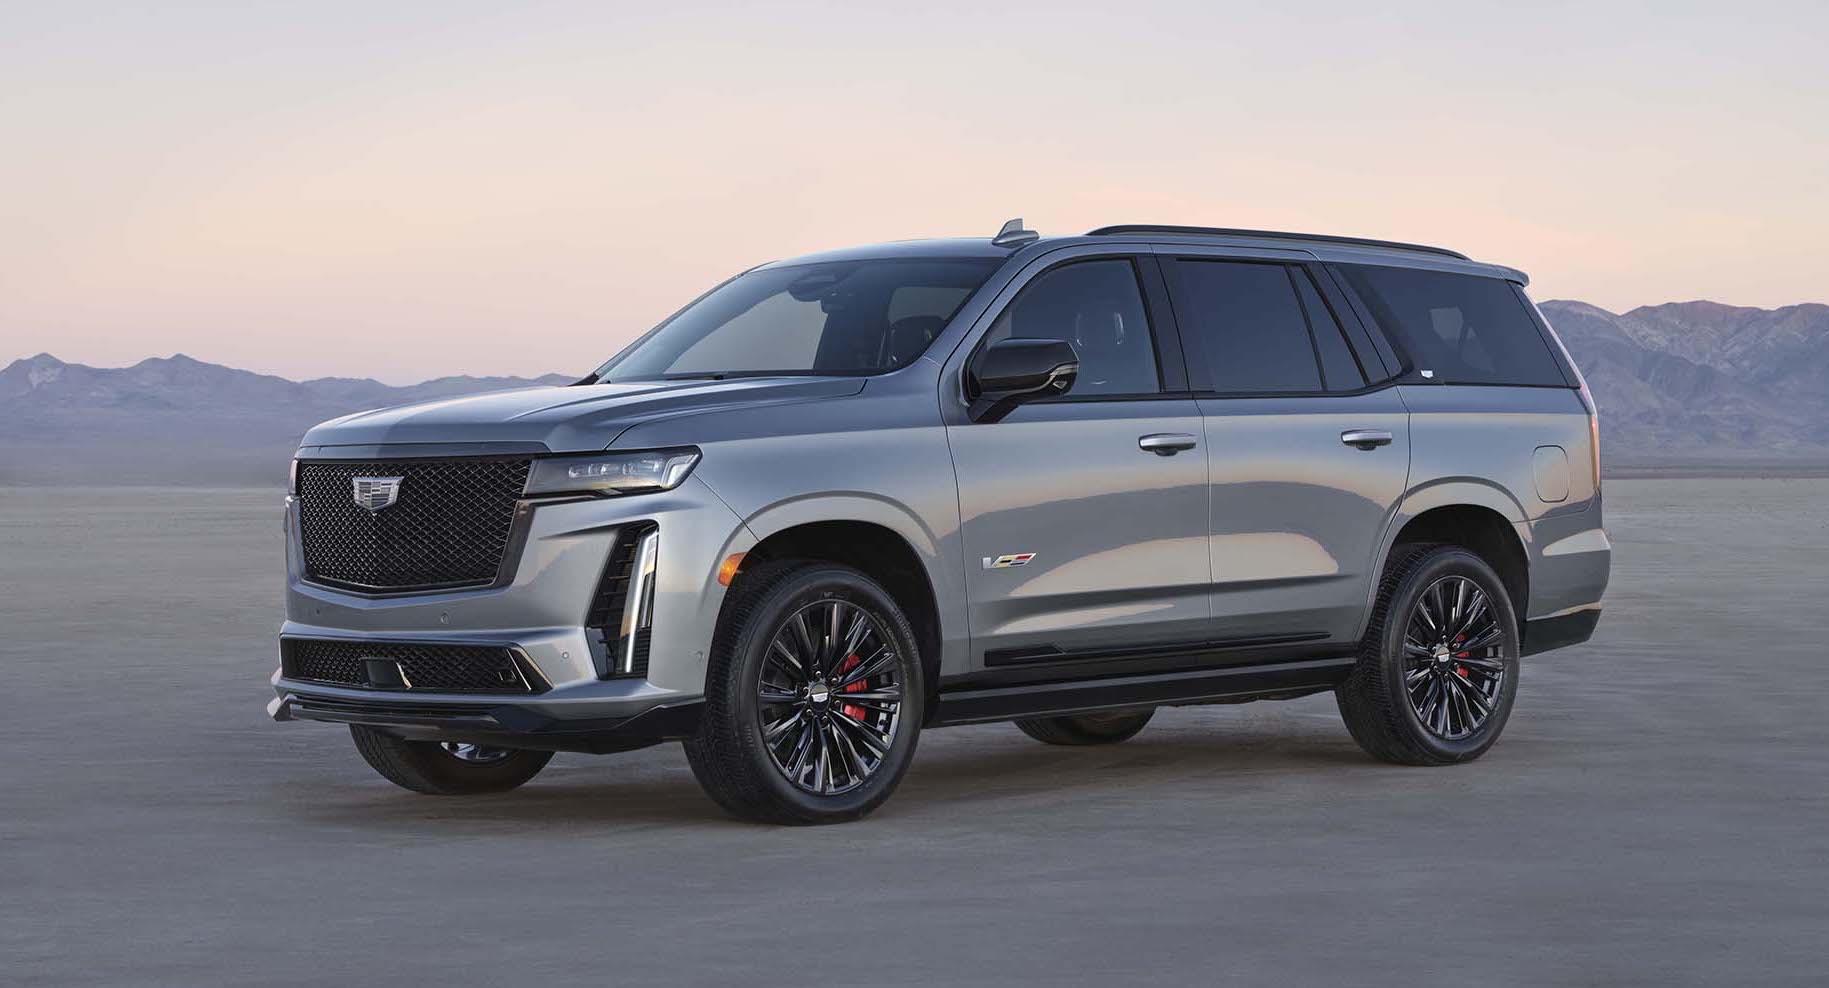 Cadillac is expanding its V-Series lineup with the Escalade-V, the industry's most powerful full-size SUV